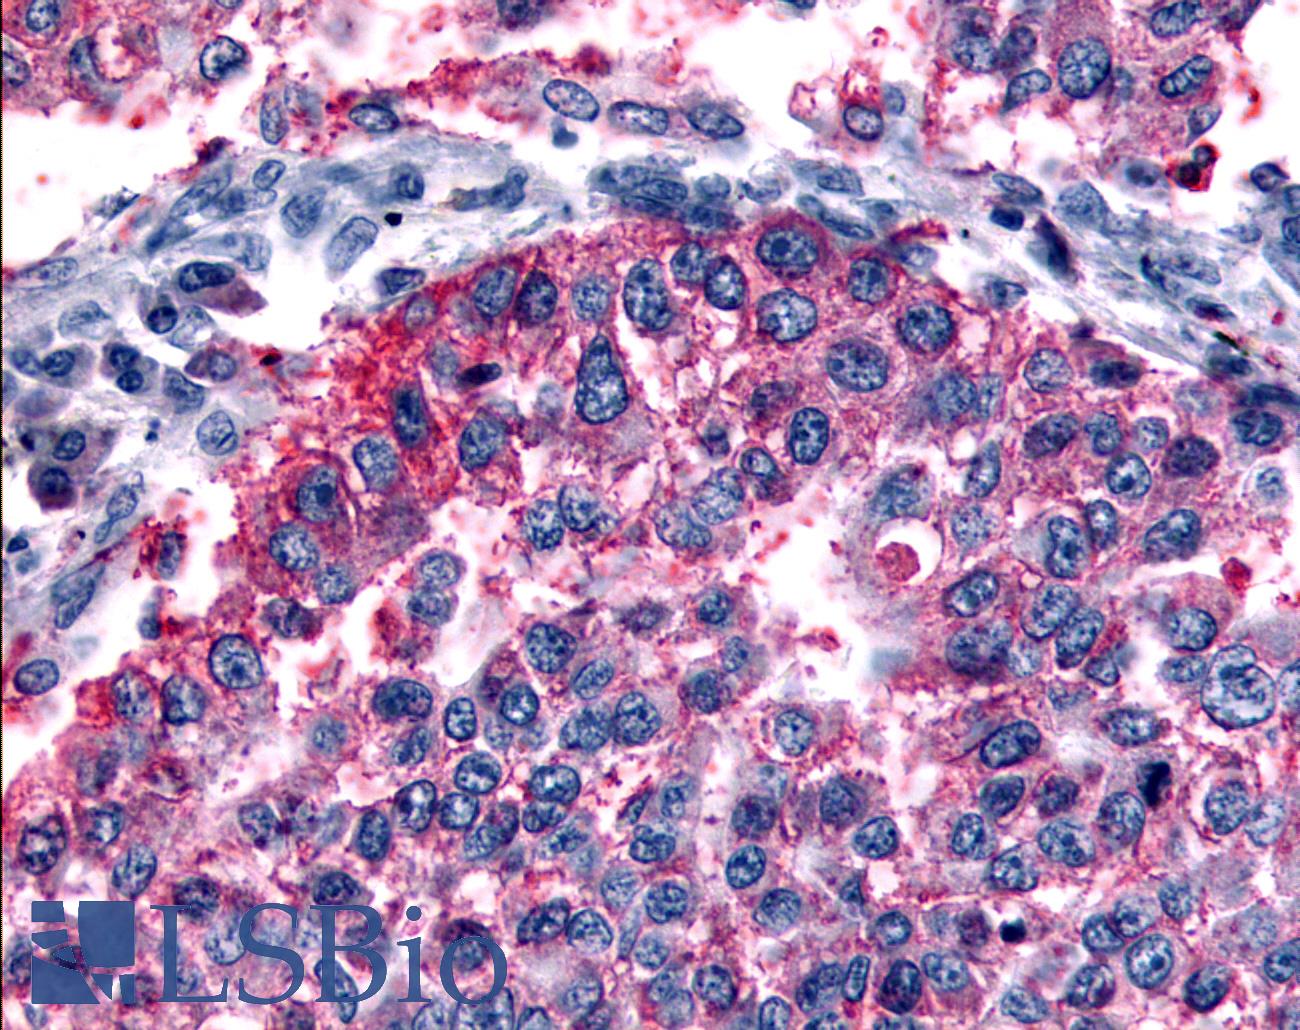 GRM6 / MGLUR6 Antibody - Anti-GRM6 / MGLUR6 antibody IHC of human Lung, Non-Small Cell Carcinoma. Immunohistochemistry of formalin-fixed, paraffin-embedded tissue after heat-induced antigen retrieval.